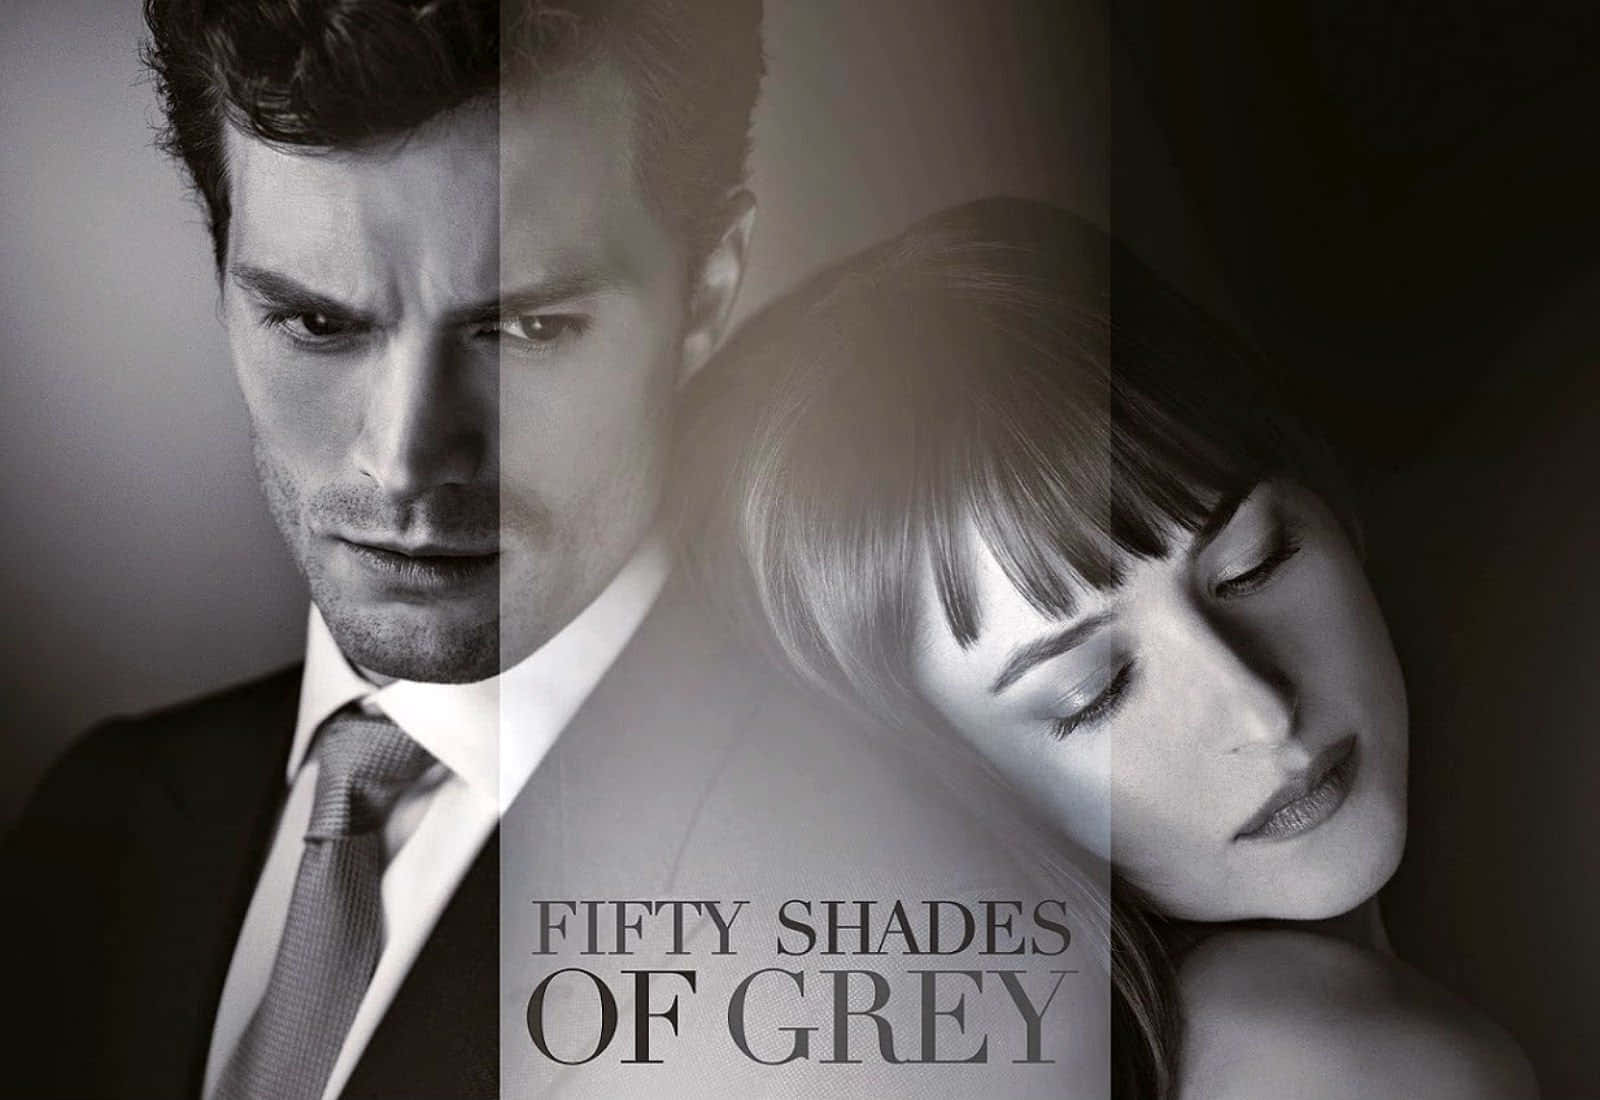 Fifty shades of grey 1080P 2K 4K 5K HD wallpapers free download   Wallpaper Flare